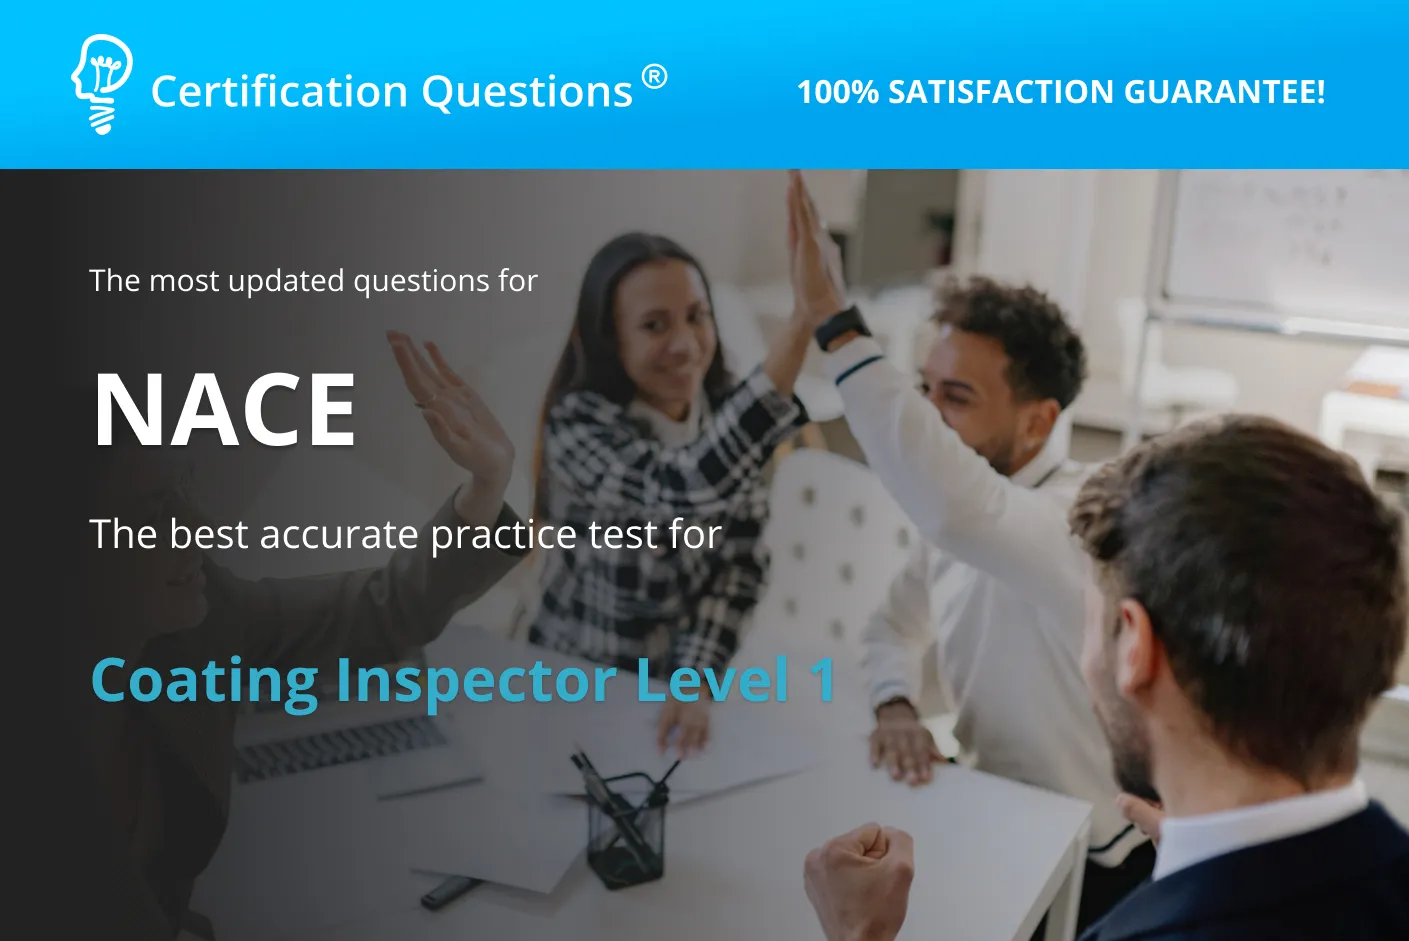 This ultimate study guide is about the Coating Inspector Level test questions in the United States.